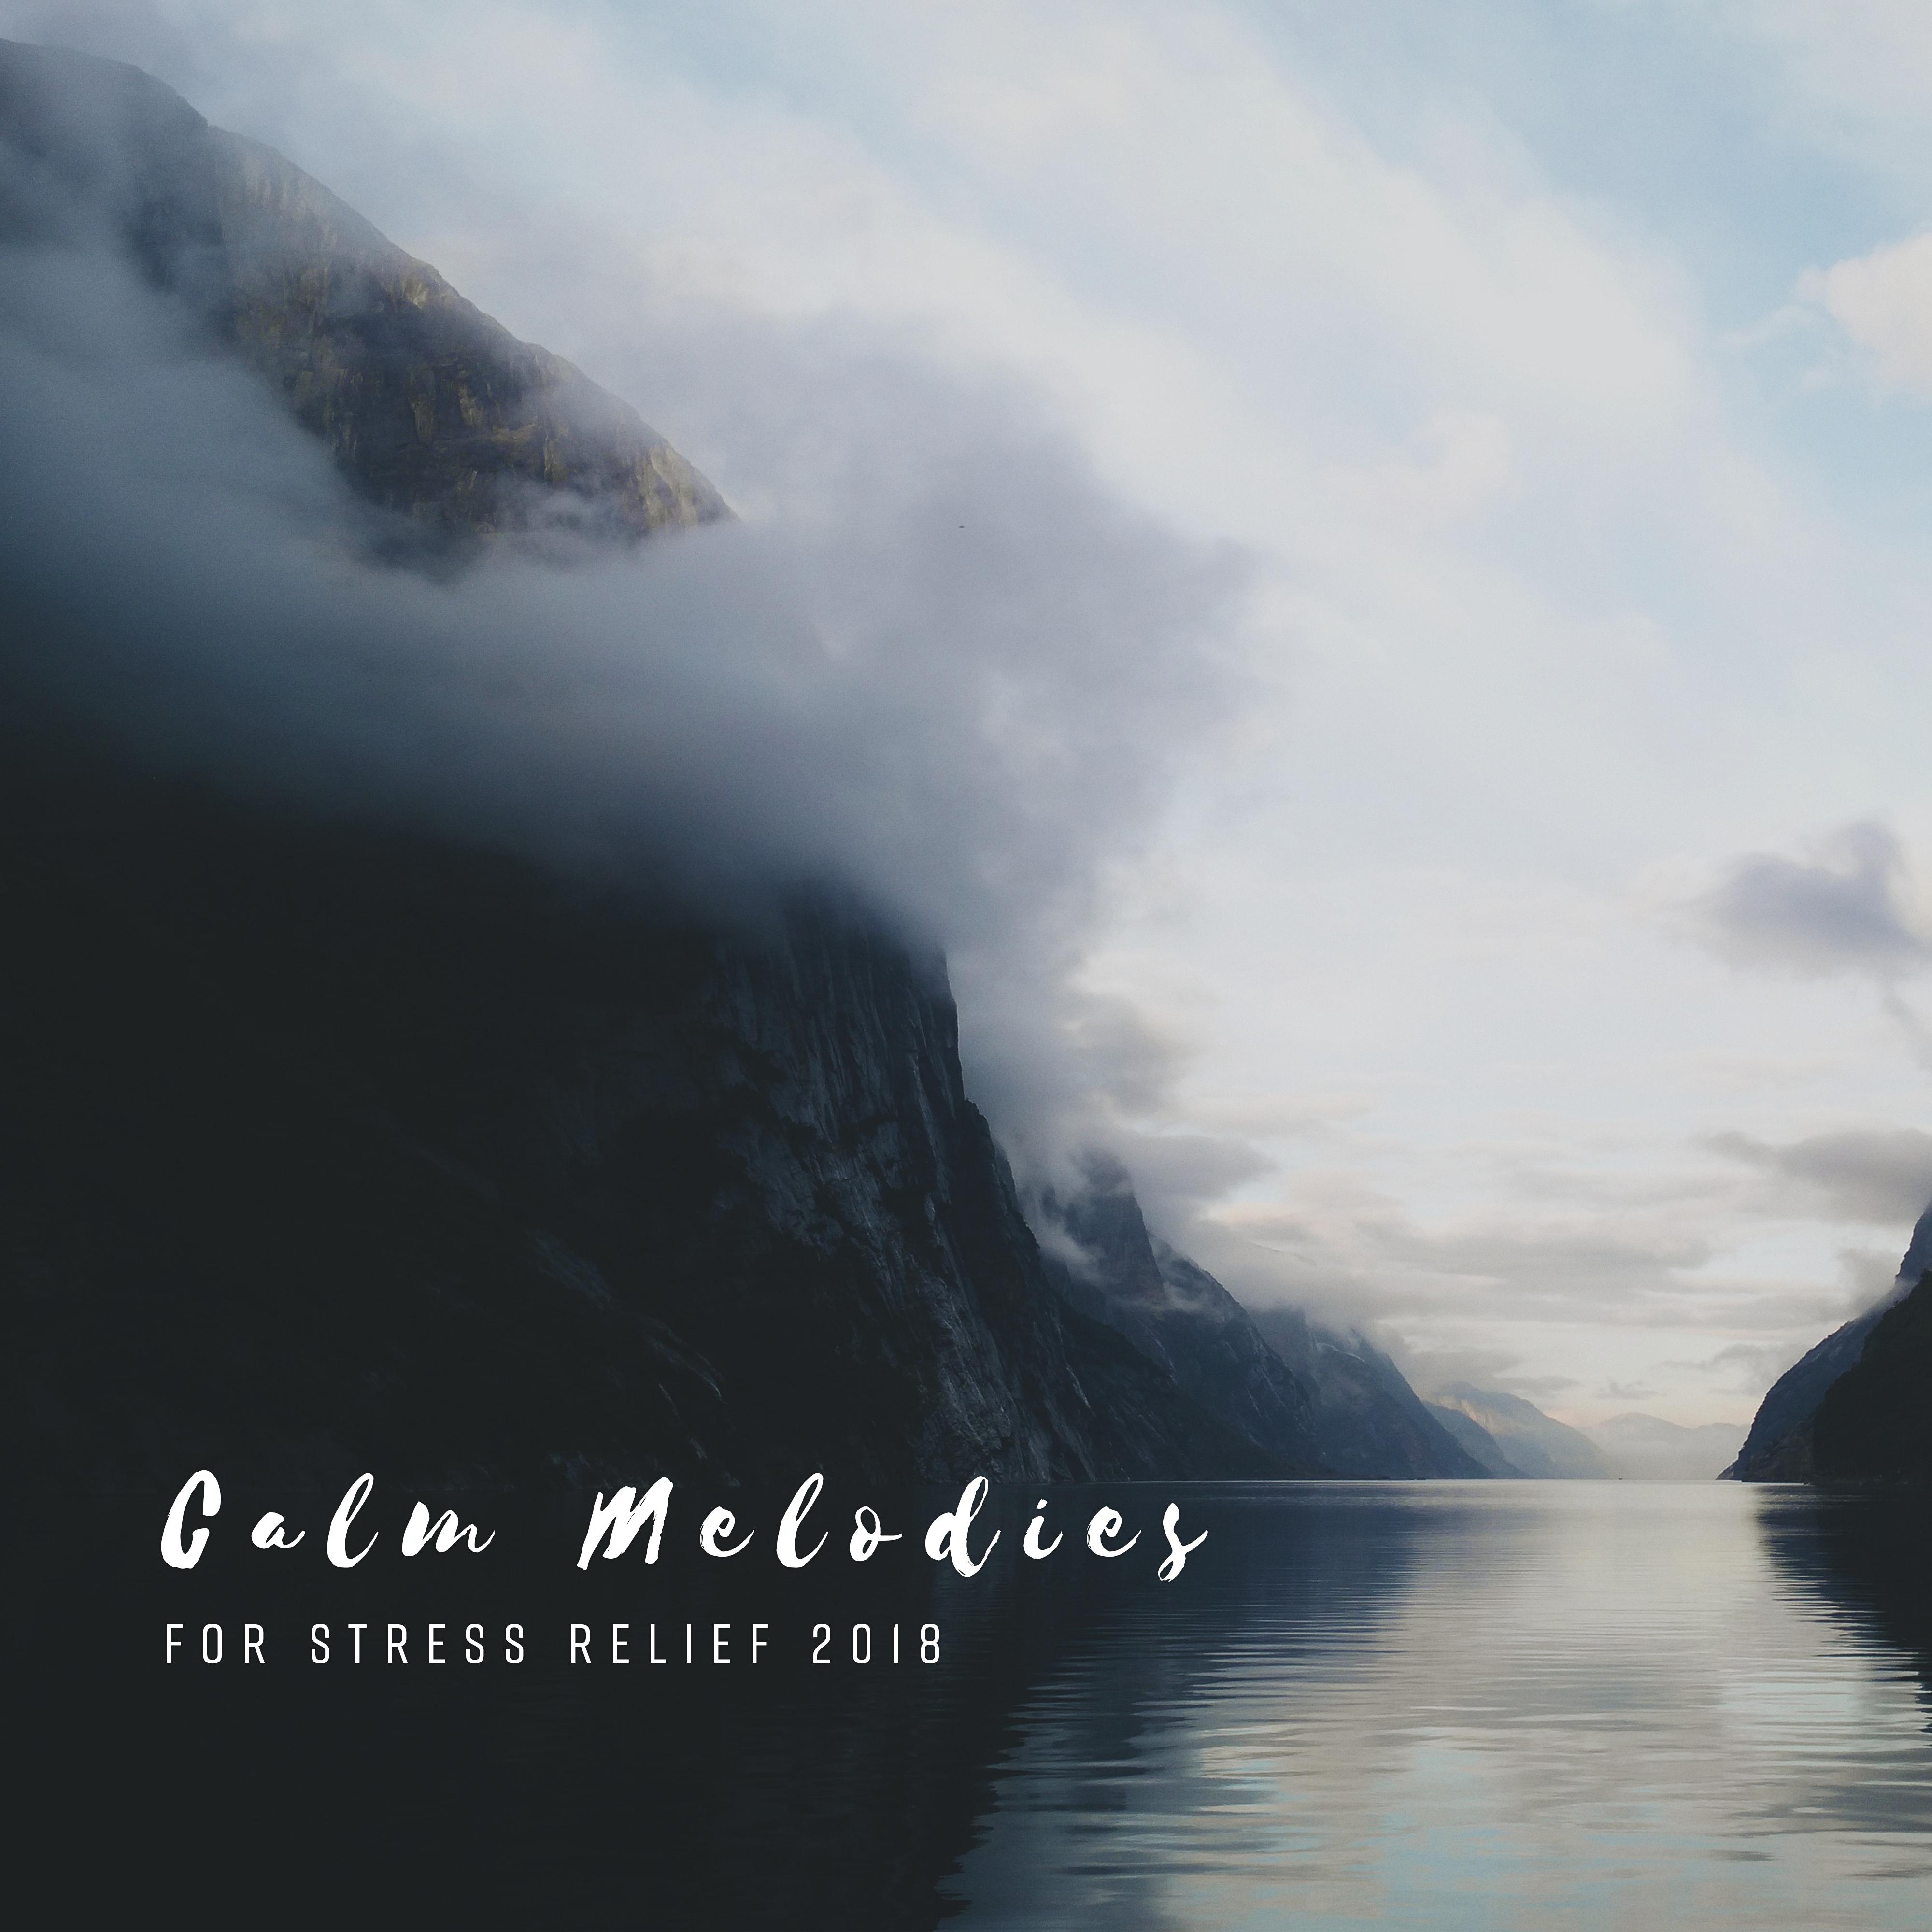 Calm Melodies for Stress Relief 2018